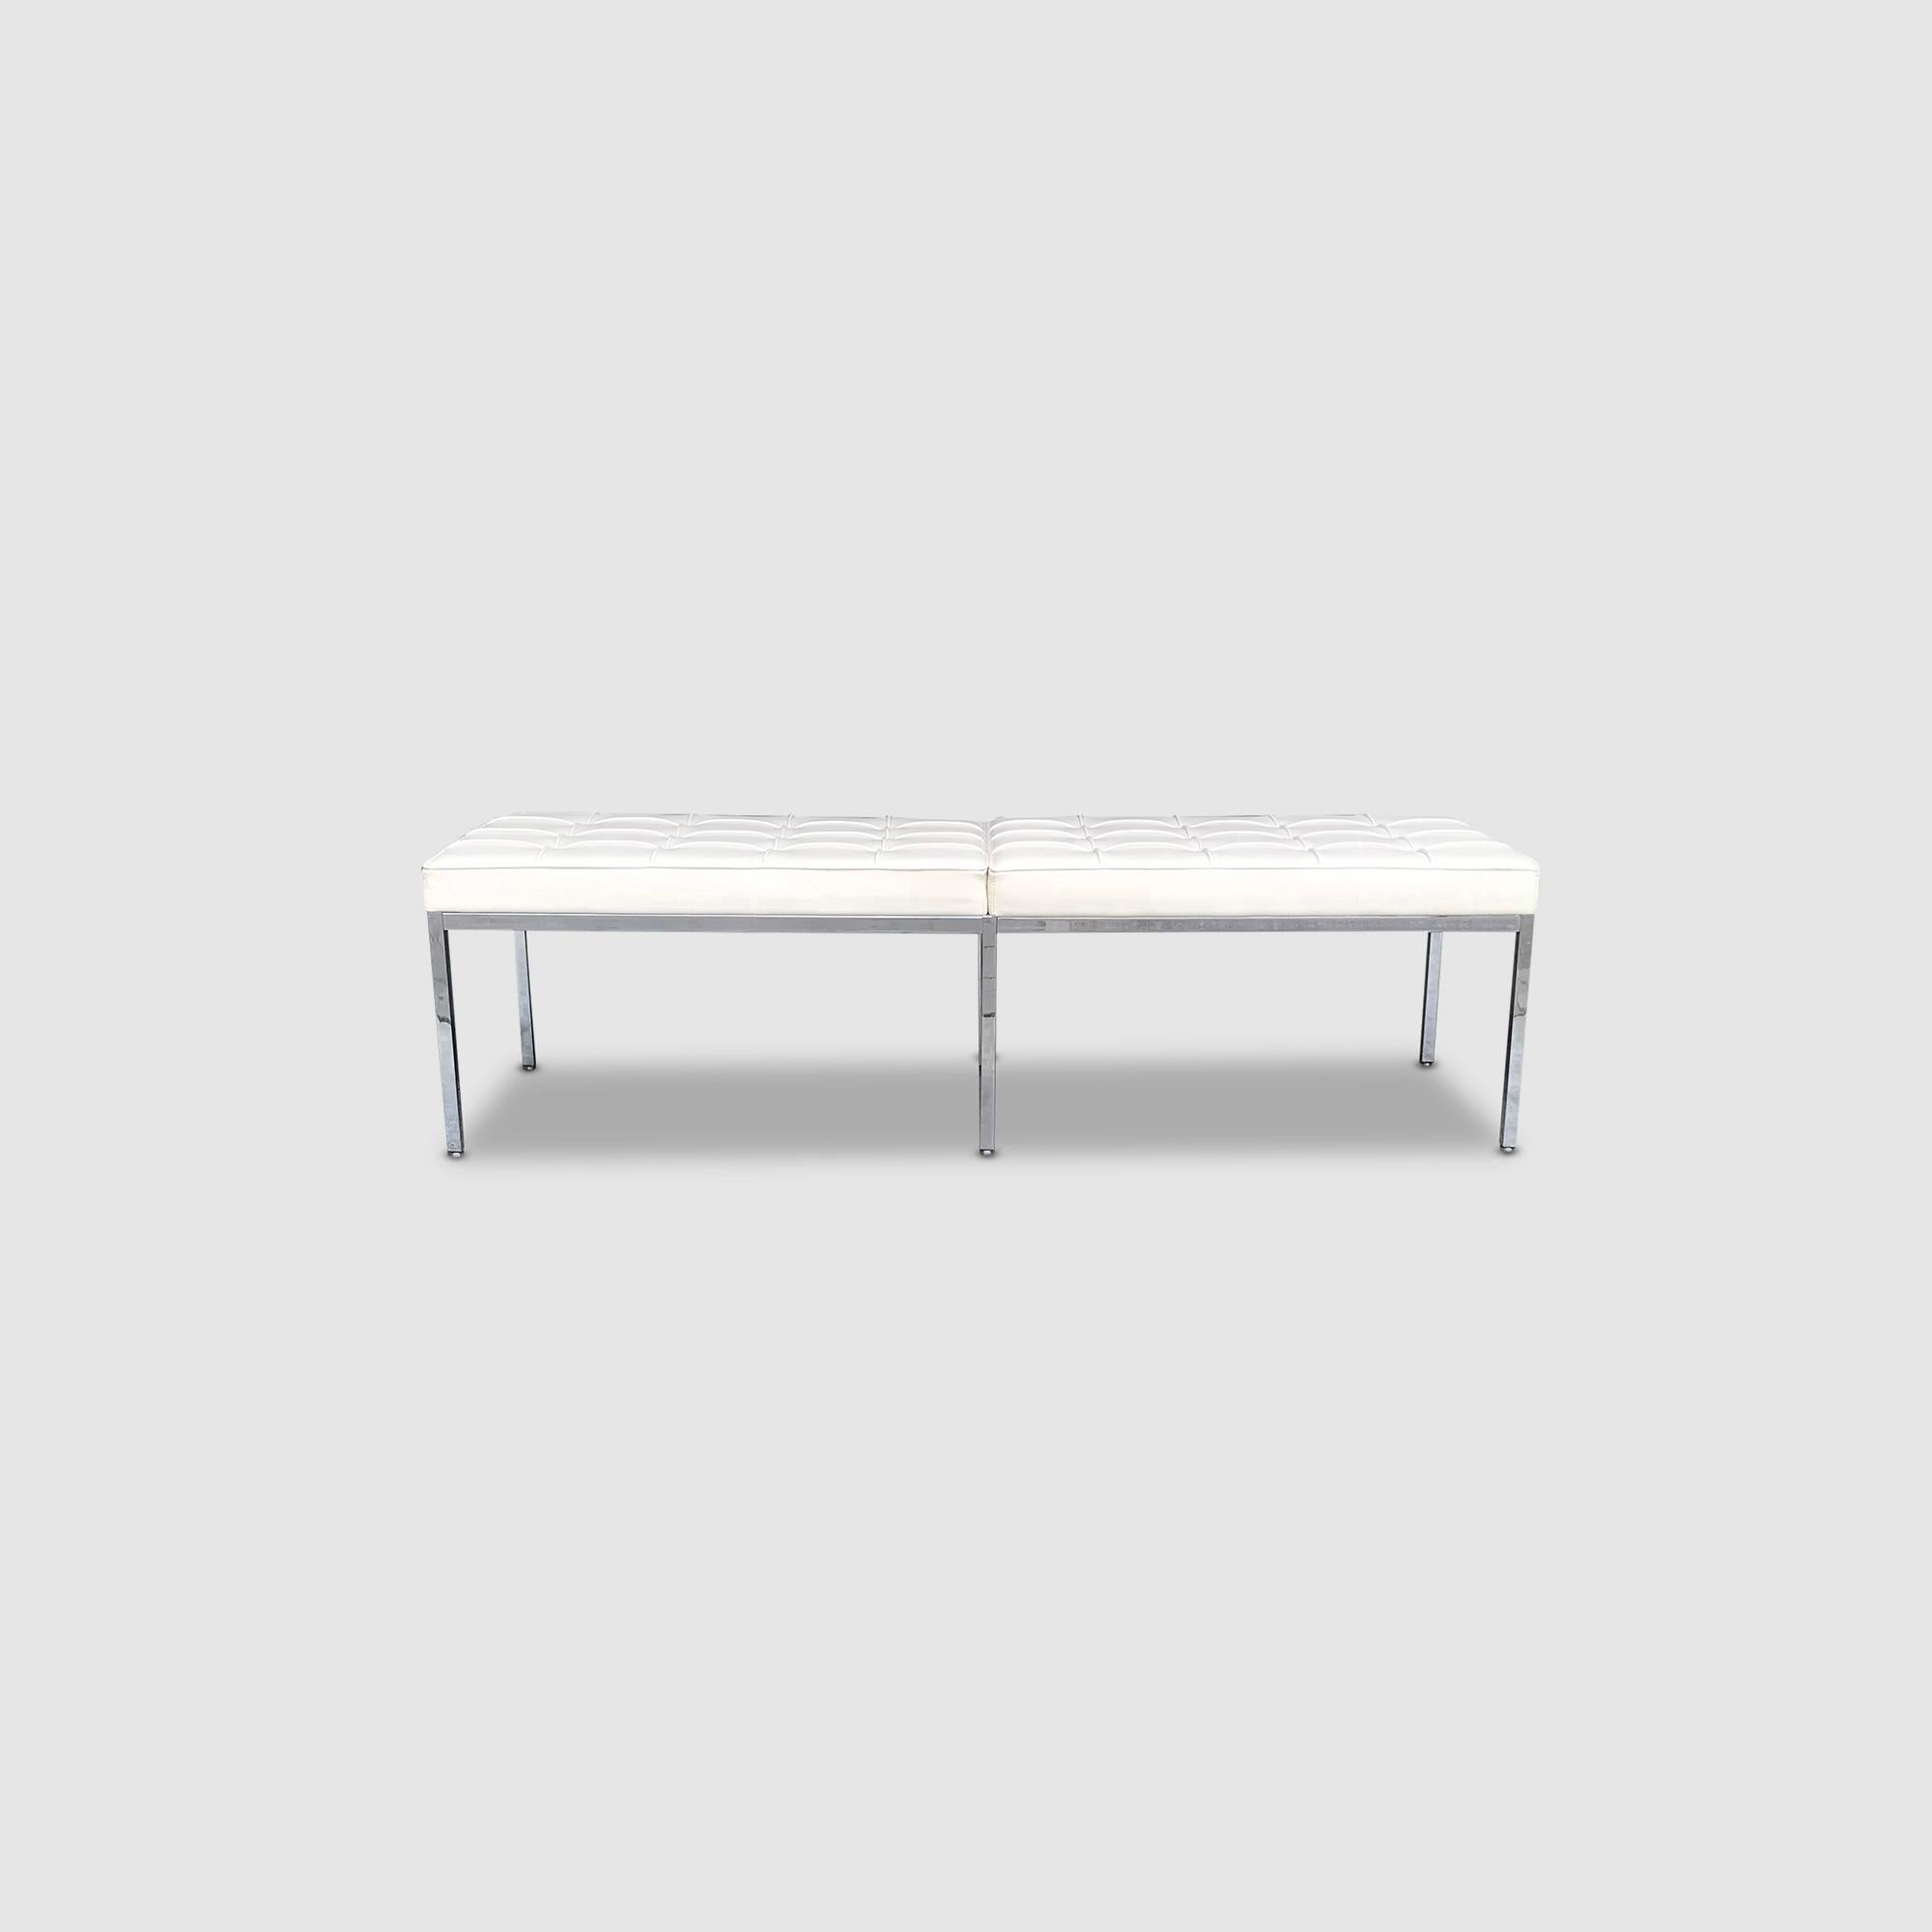 Steel Relax 3-seater leather bench by Florence Knoll for Knoll International 2000s